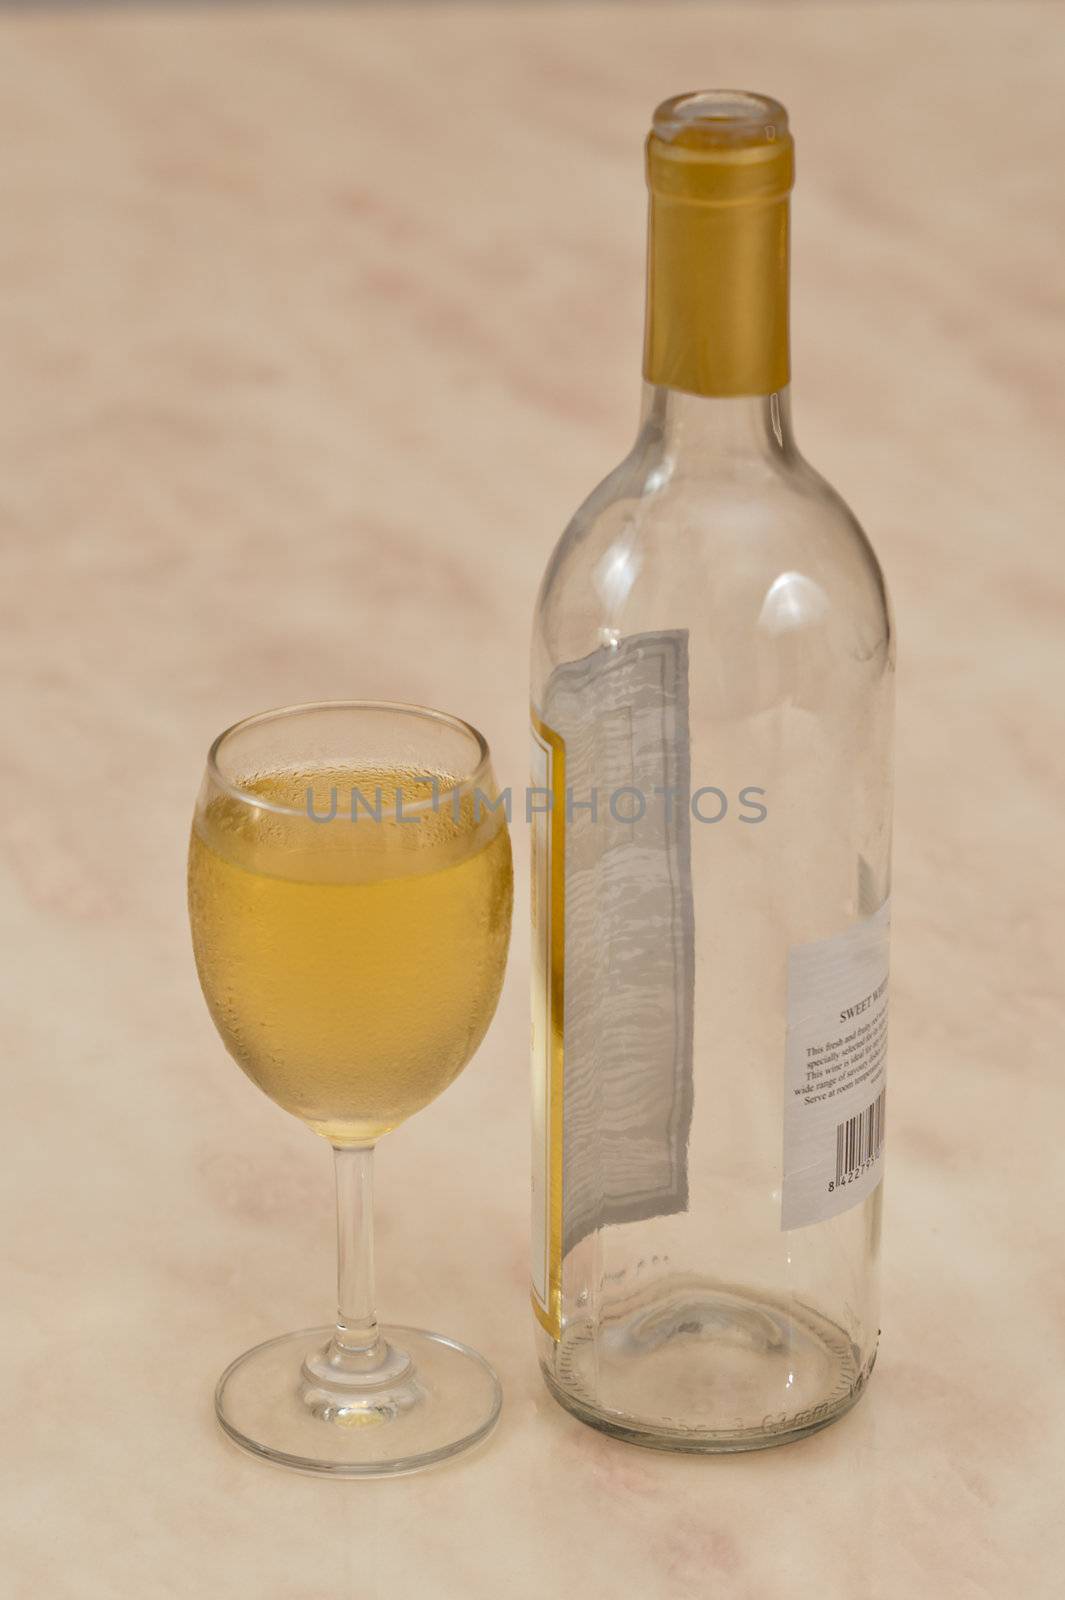 white wine and bottle by oguzdkn